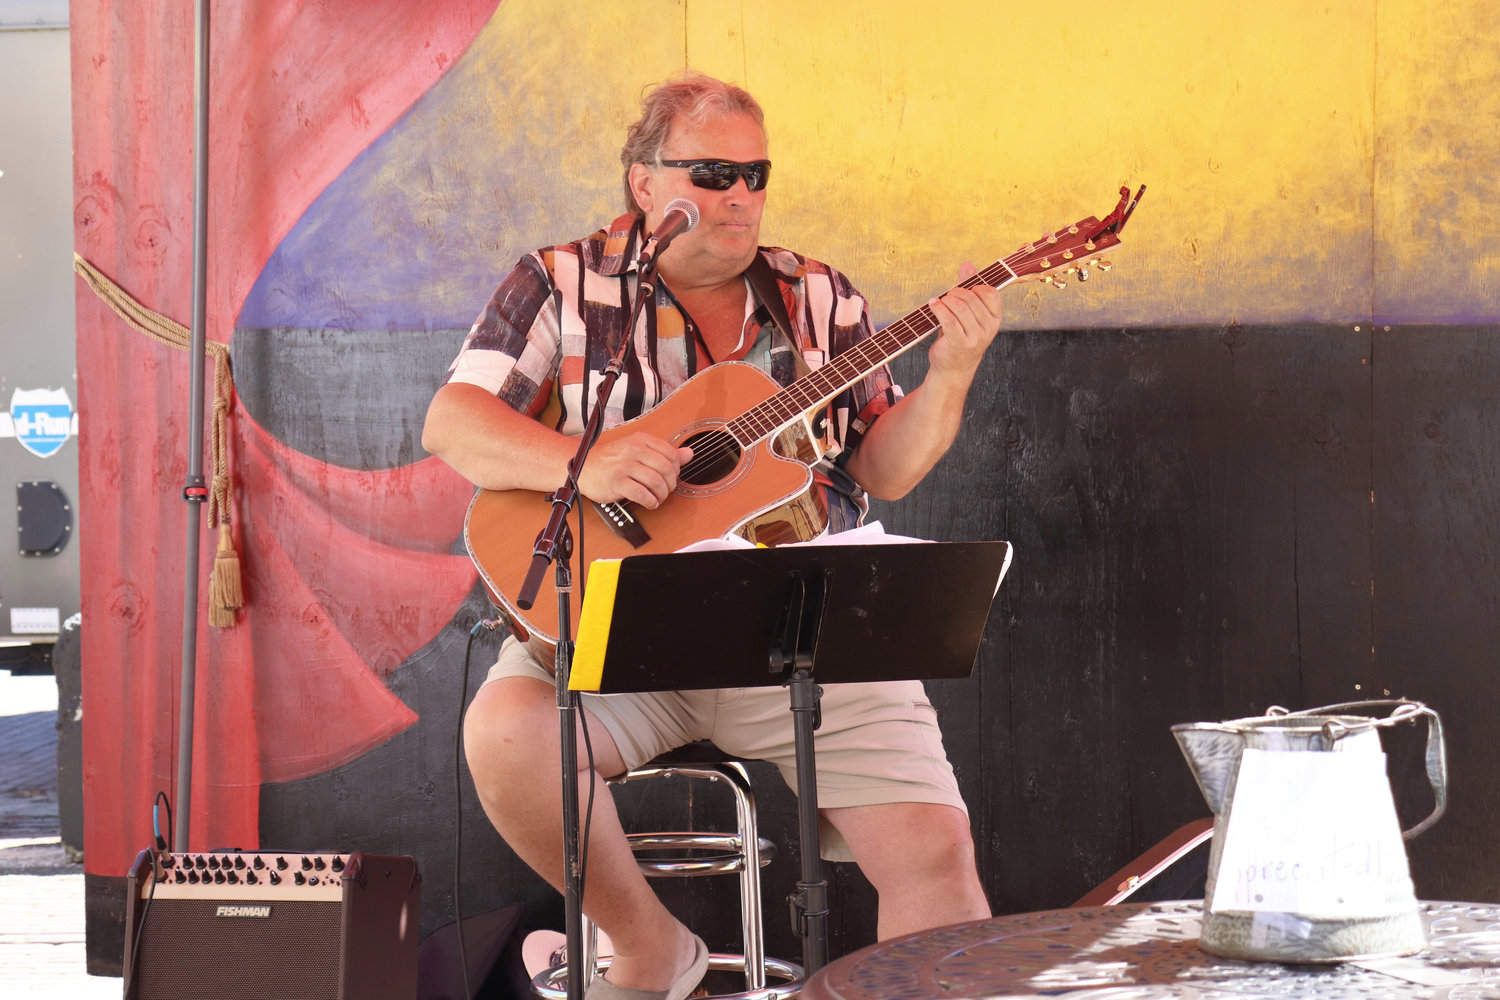 Musician Dennis Harris performs at Antique Fest in downtown Centralia on Sunday.